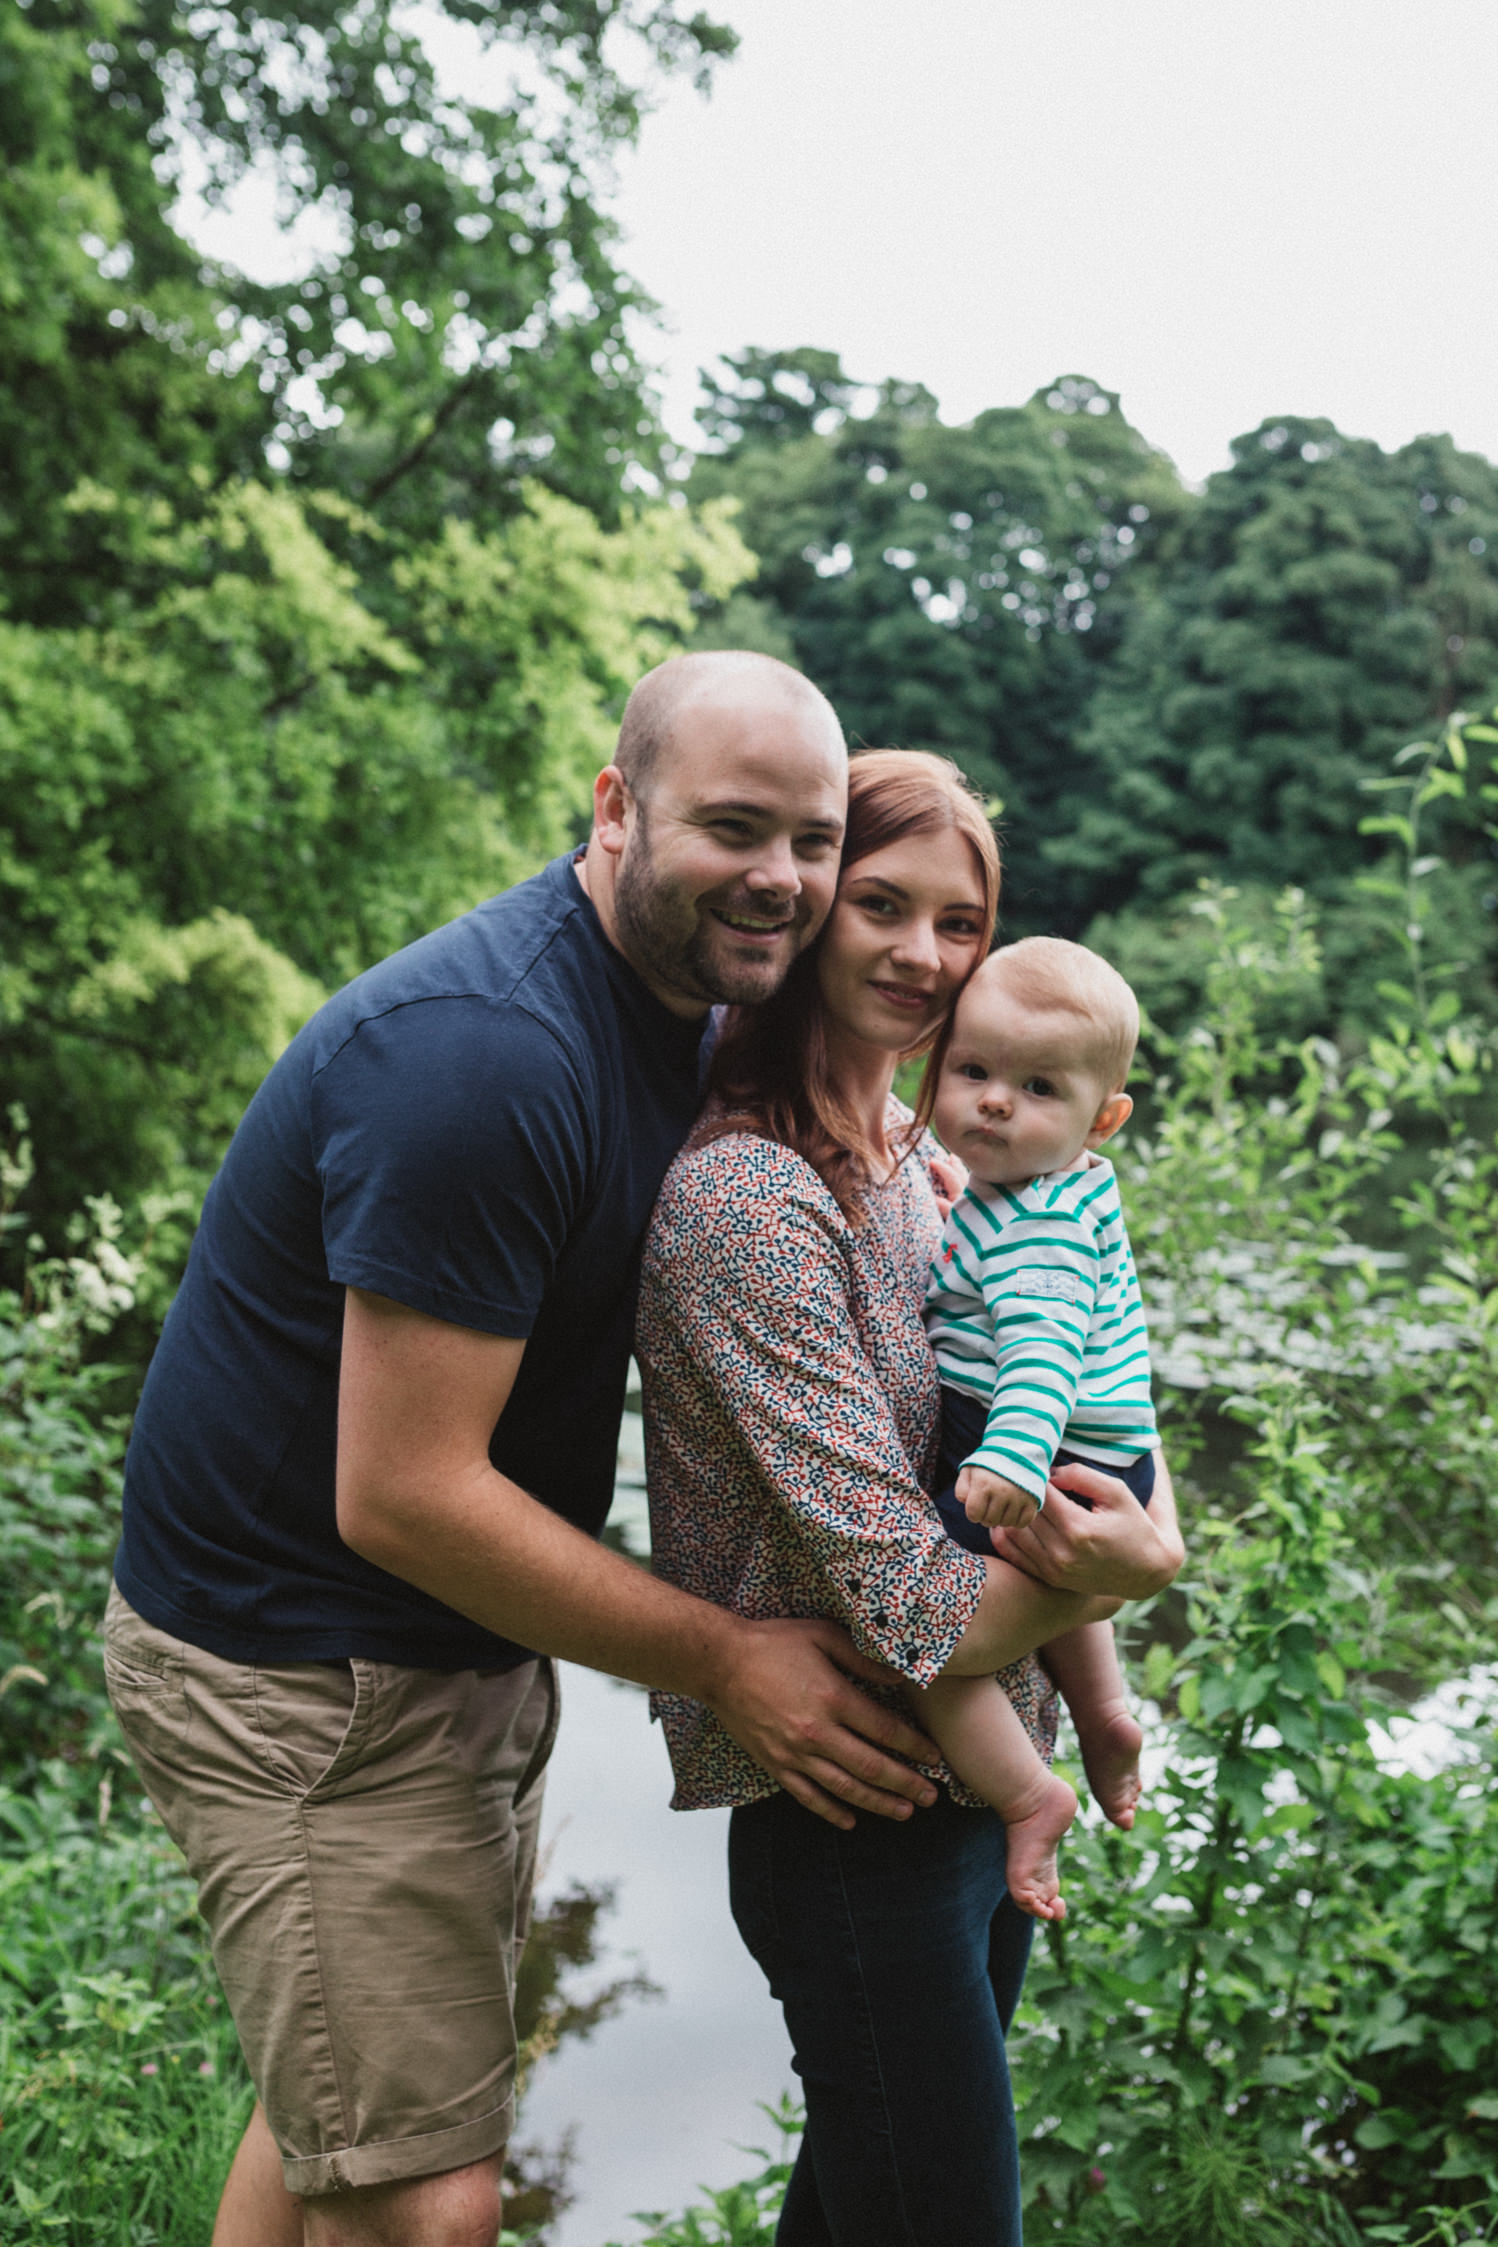 natural outdoor family shoot in Ipswich Suffolk